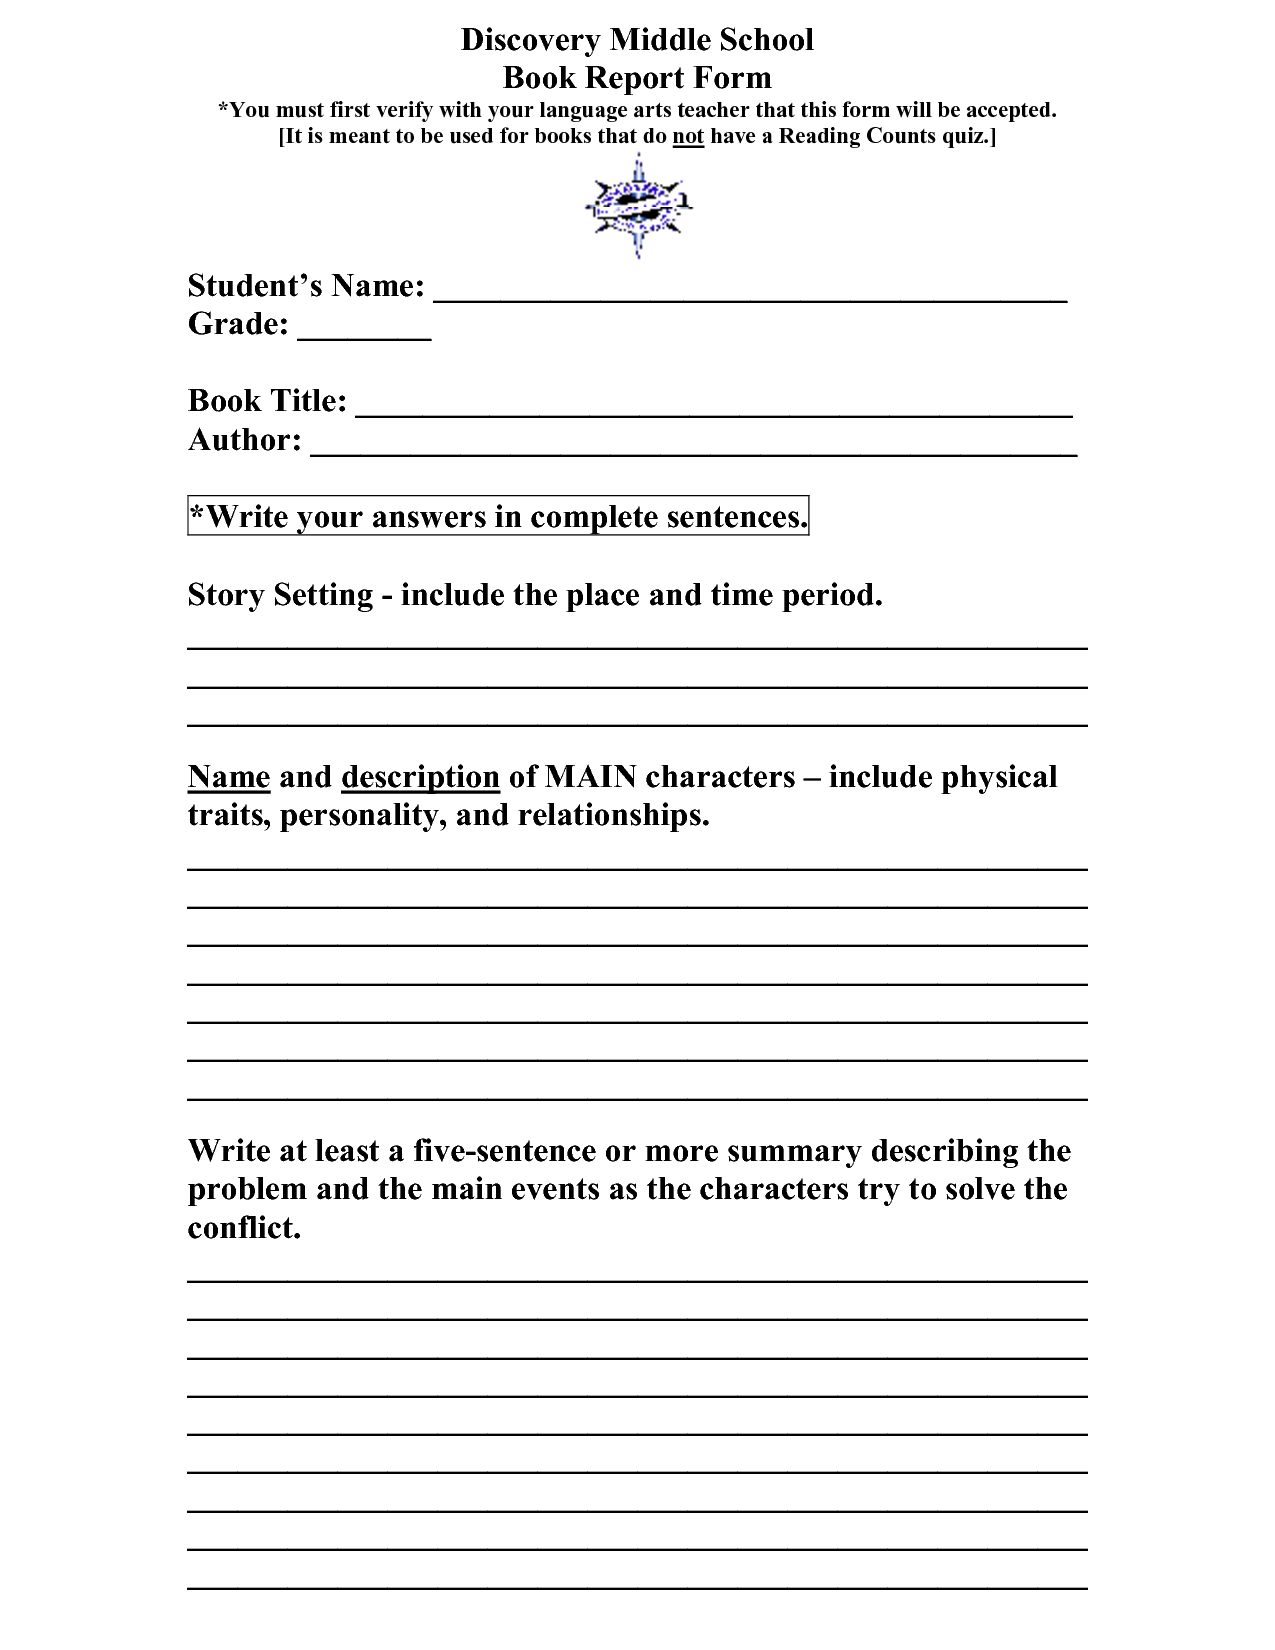 Scope Of Work Template | Teaching & Learning | High School With Middle School Book Report Template